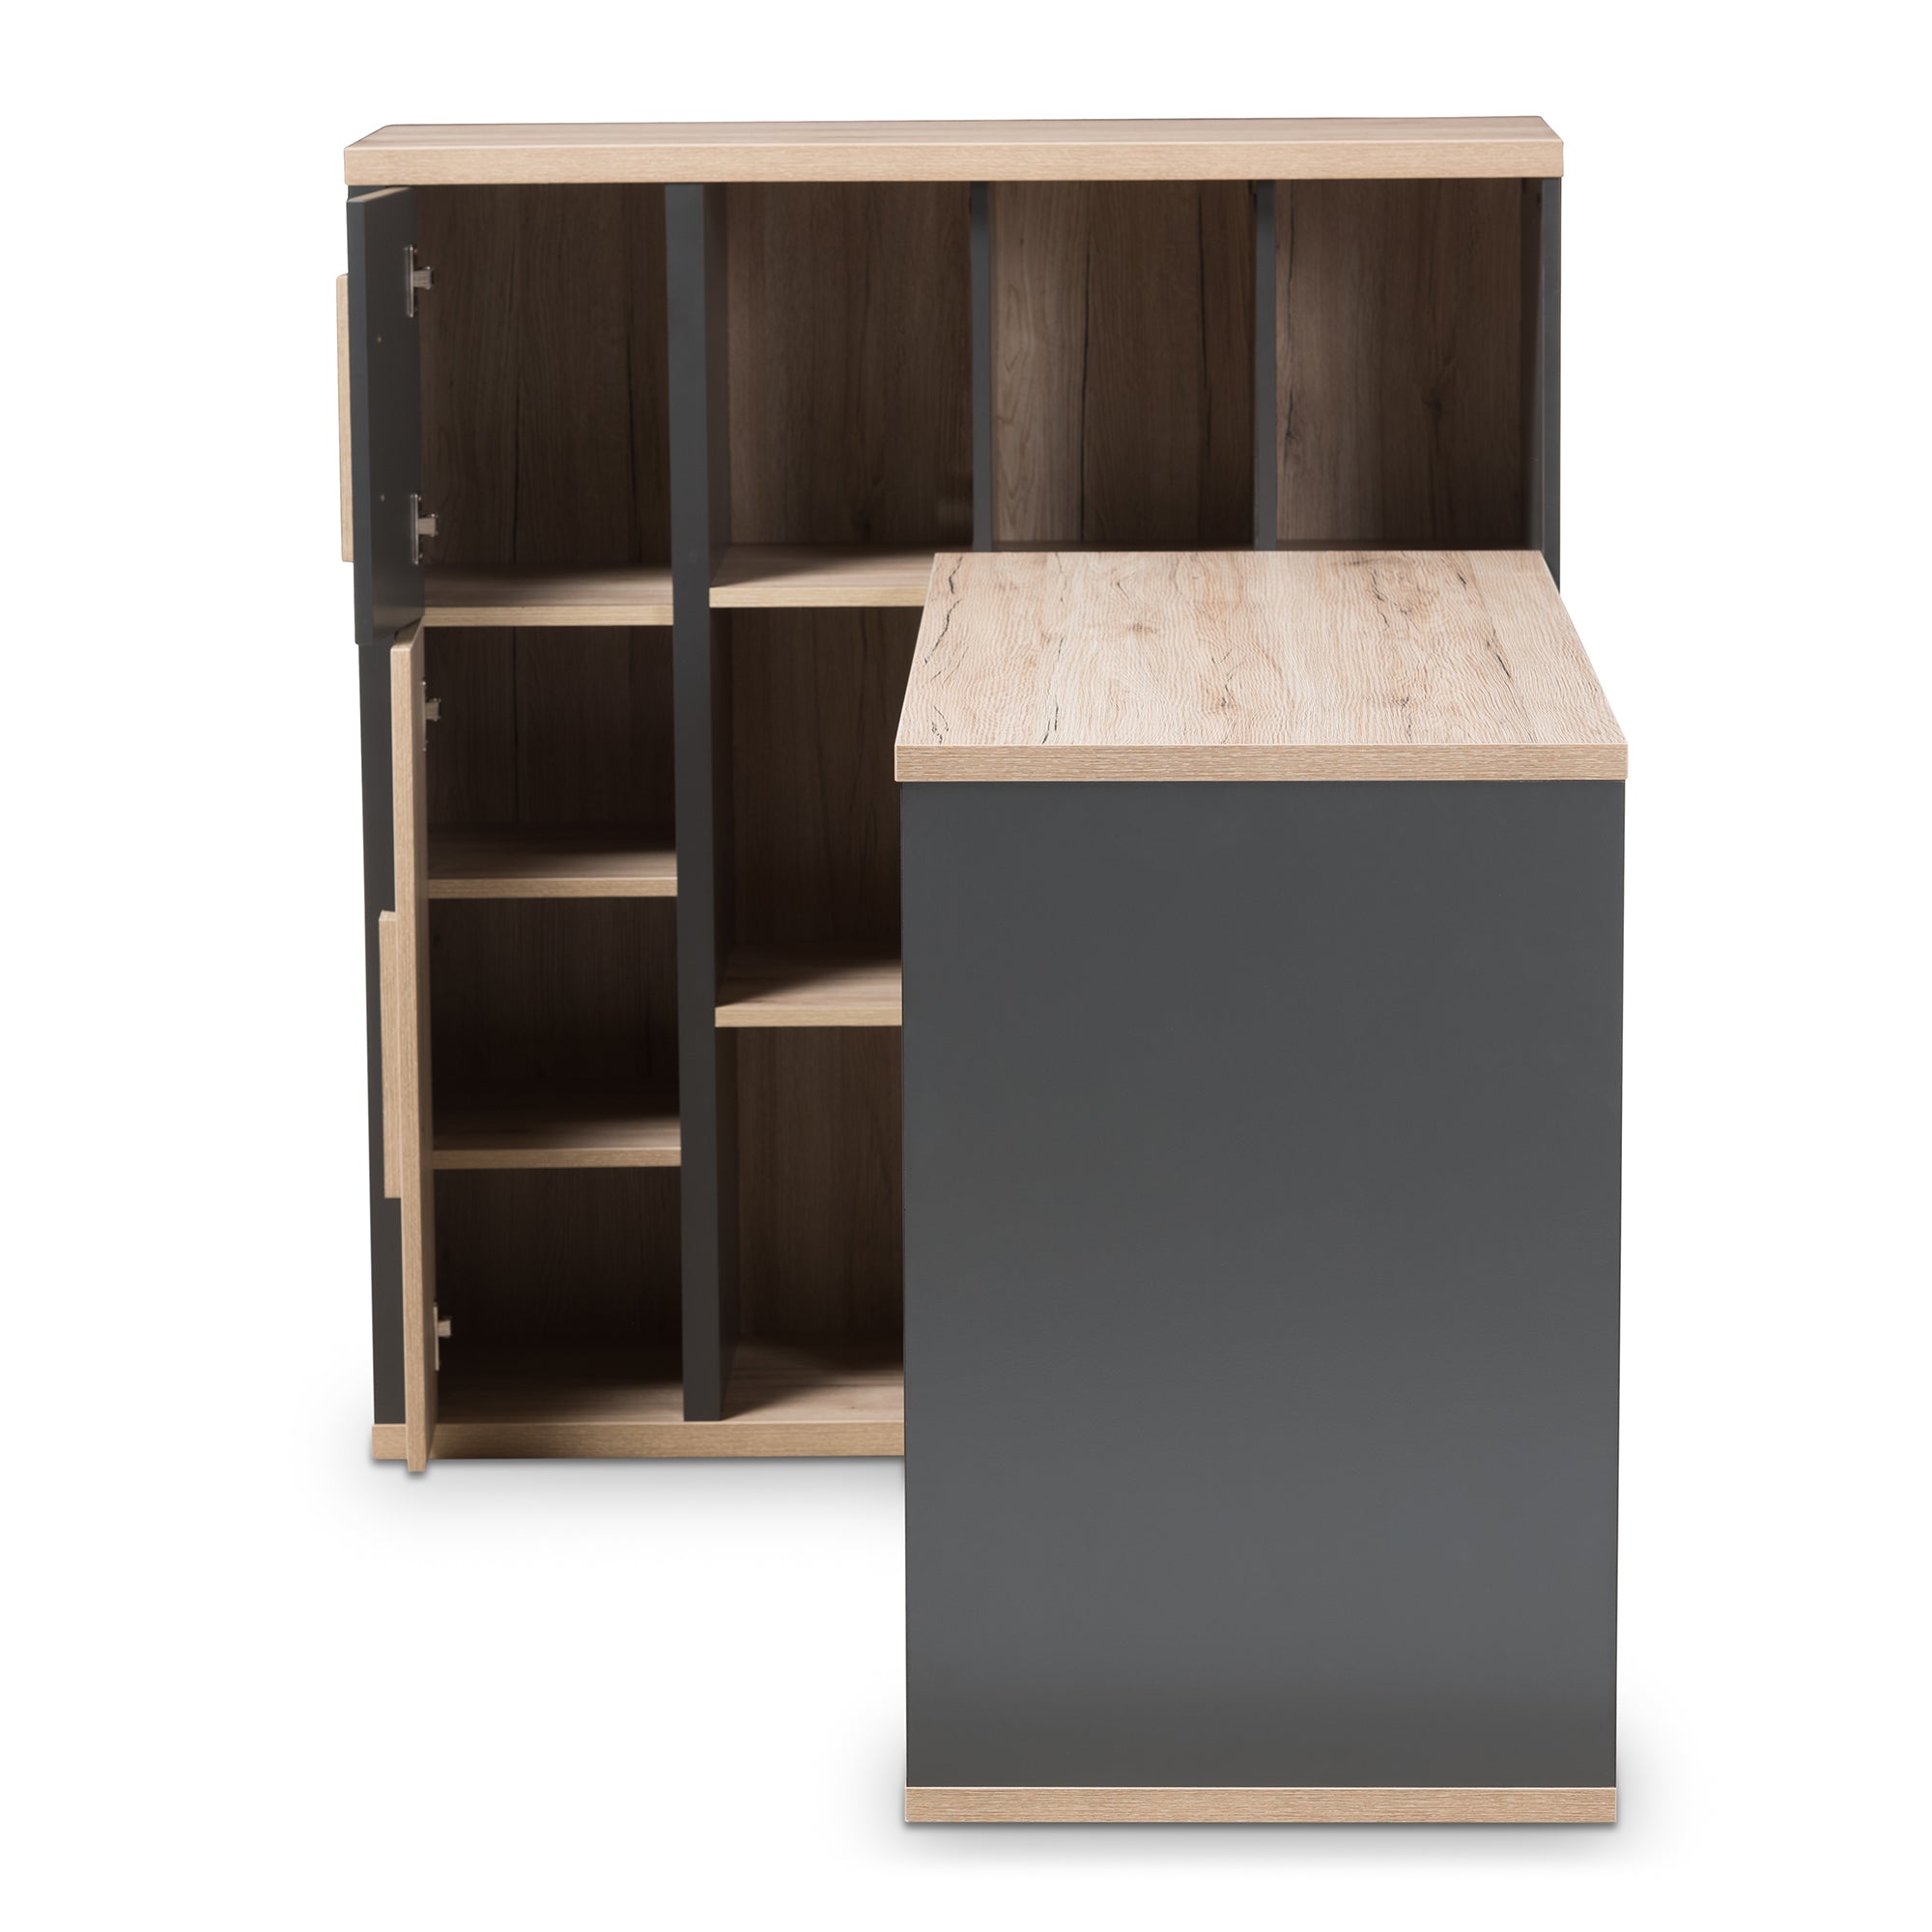 Pandora Contemporary Desk Two-Tone with Built-in Shelving Unit-Desk-Baxton Studio - WI-Wall2Wall Furnishings